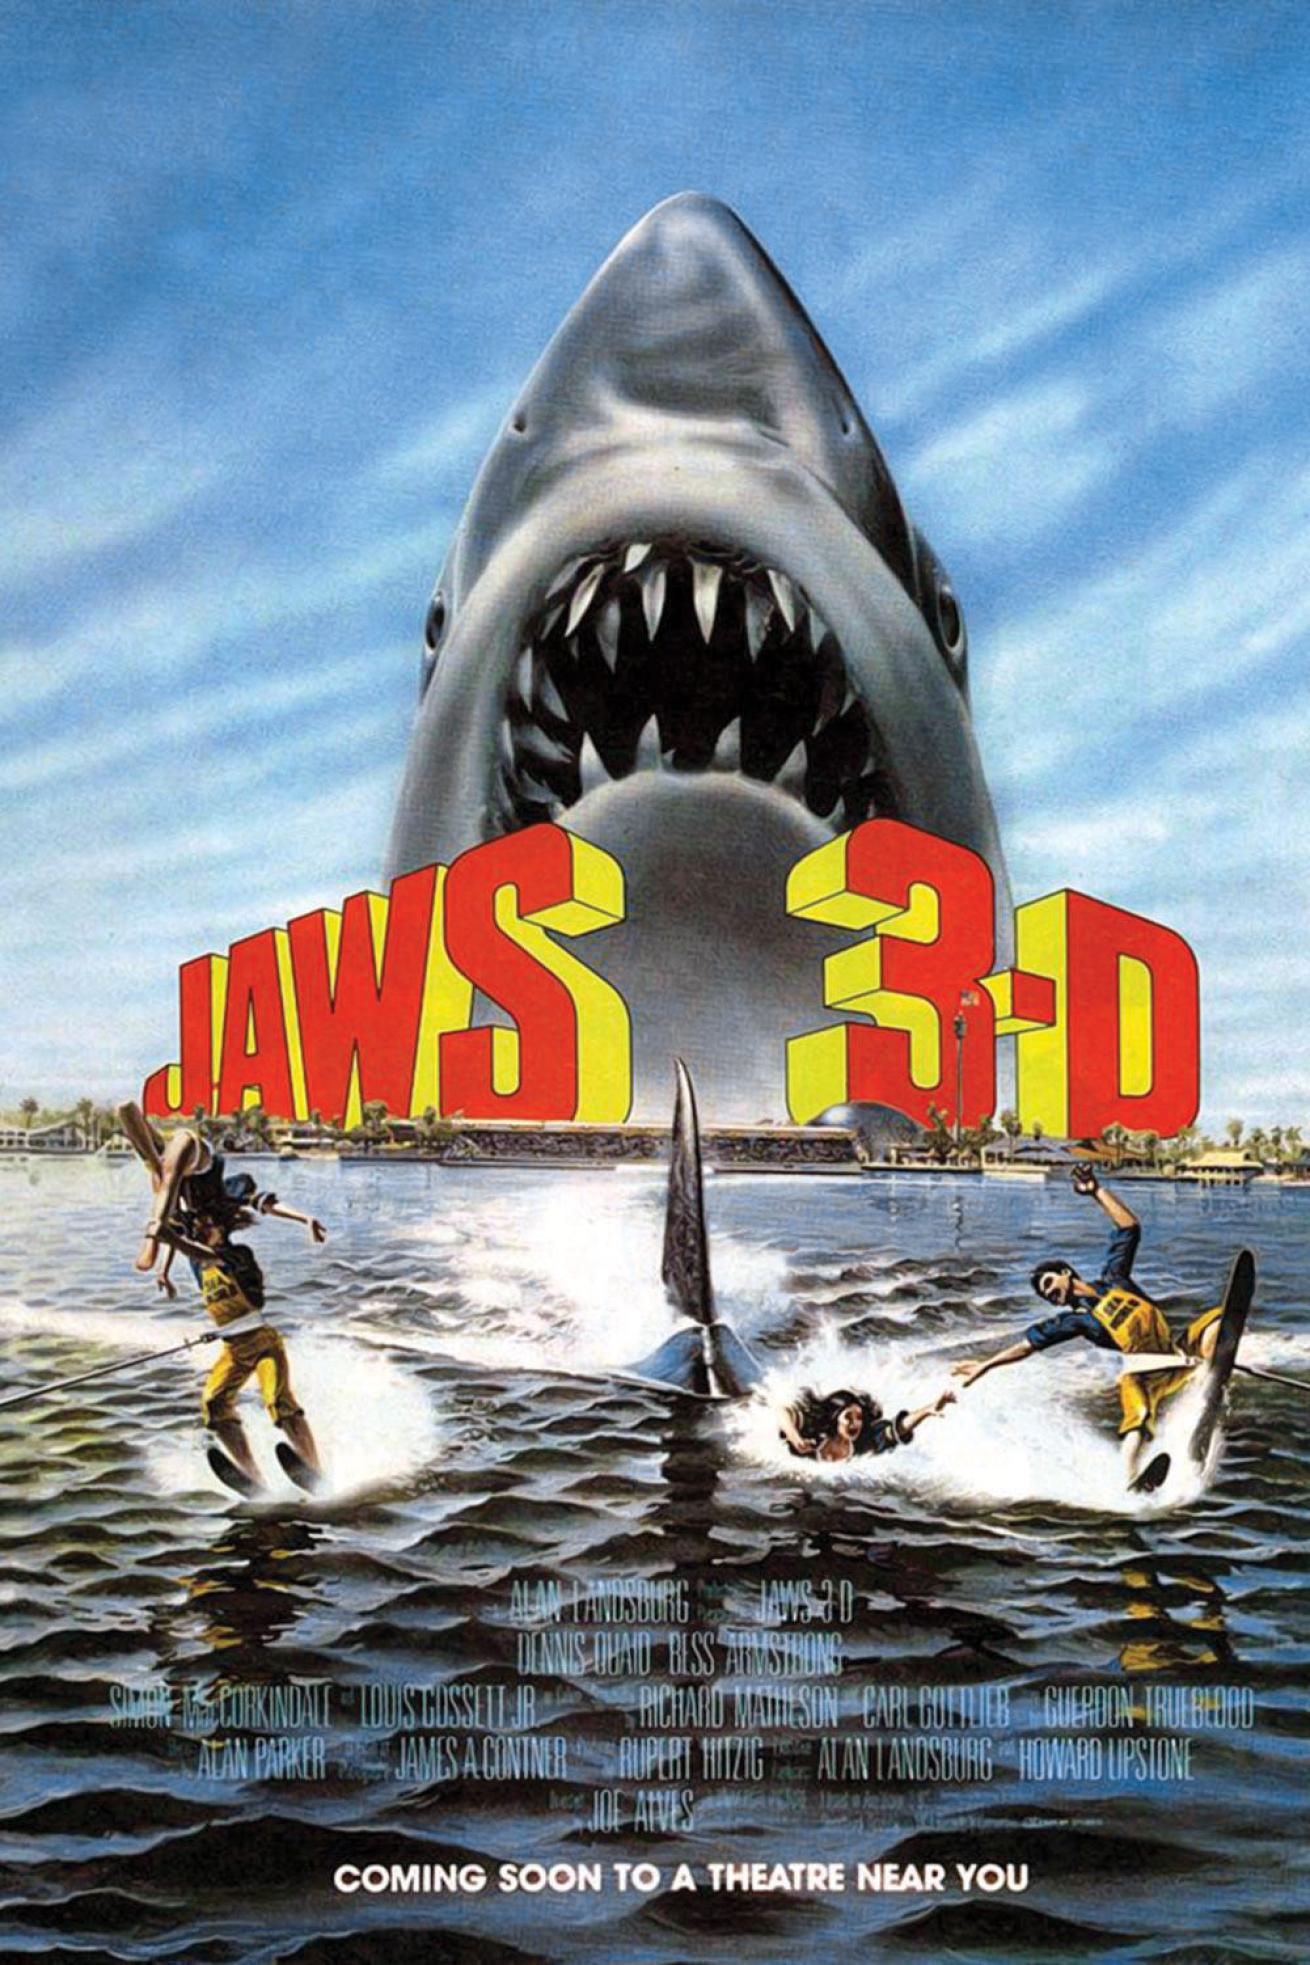 JAWS 3-D Movie Poster